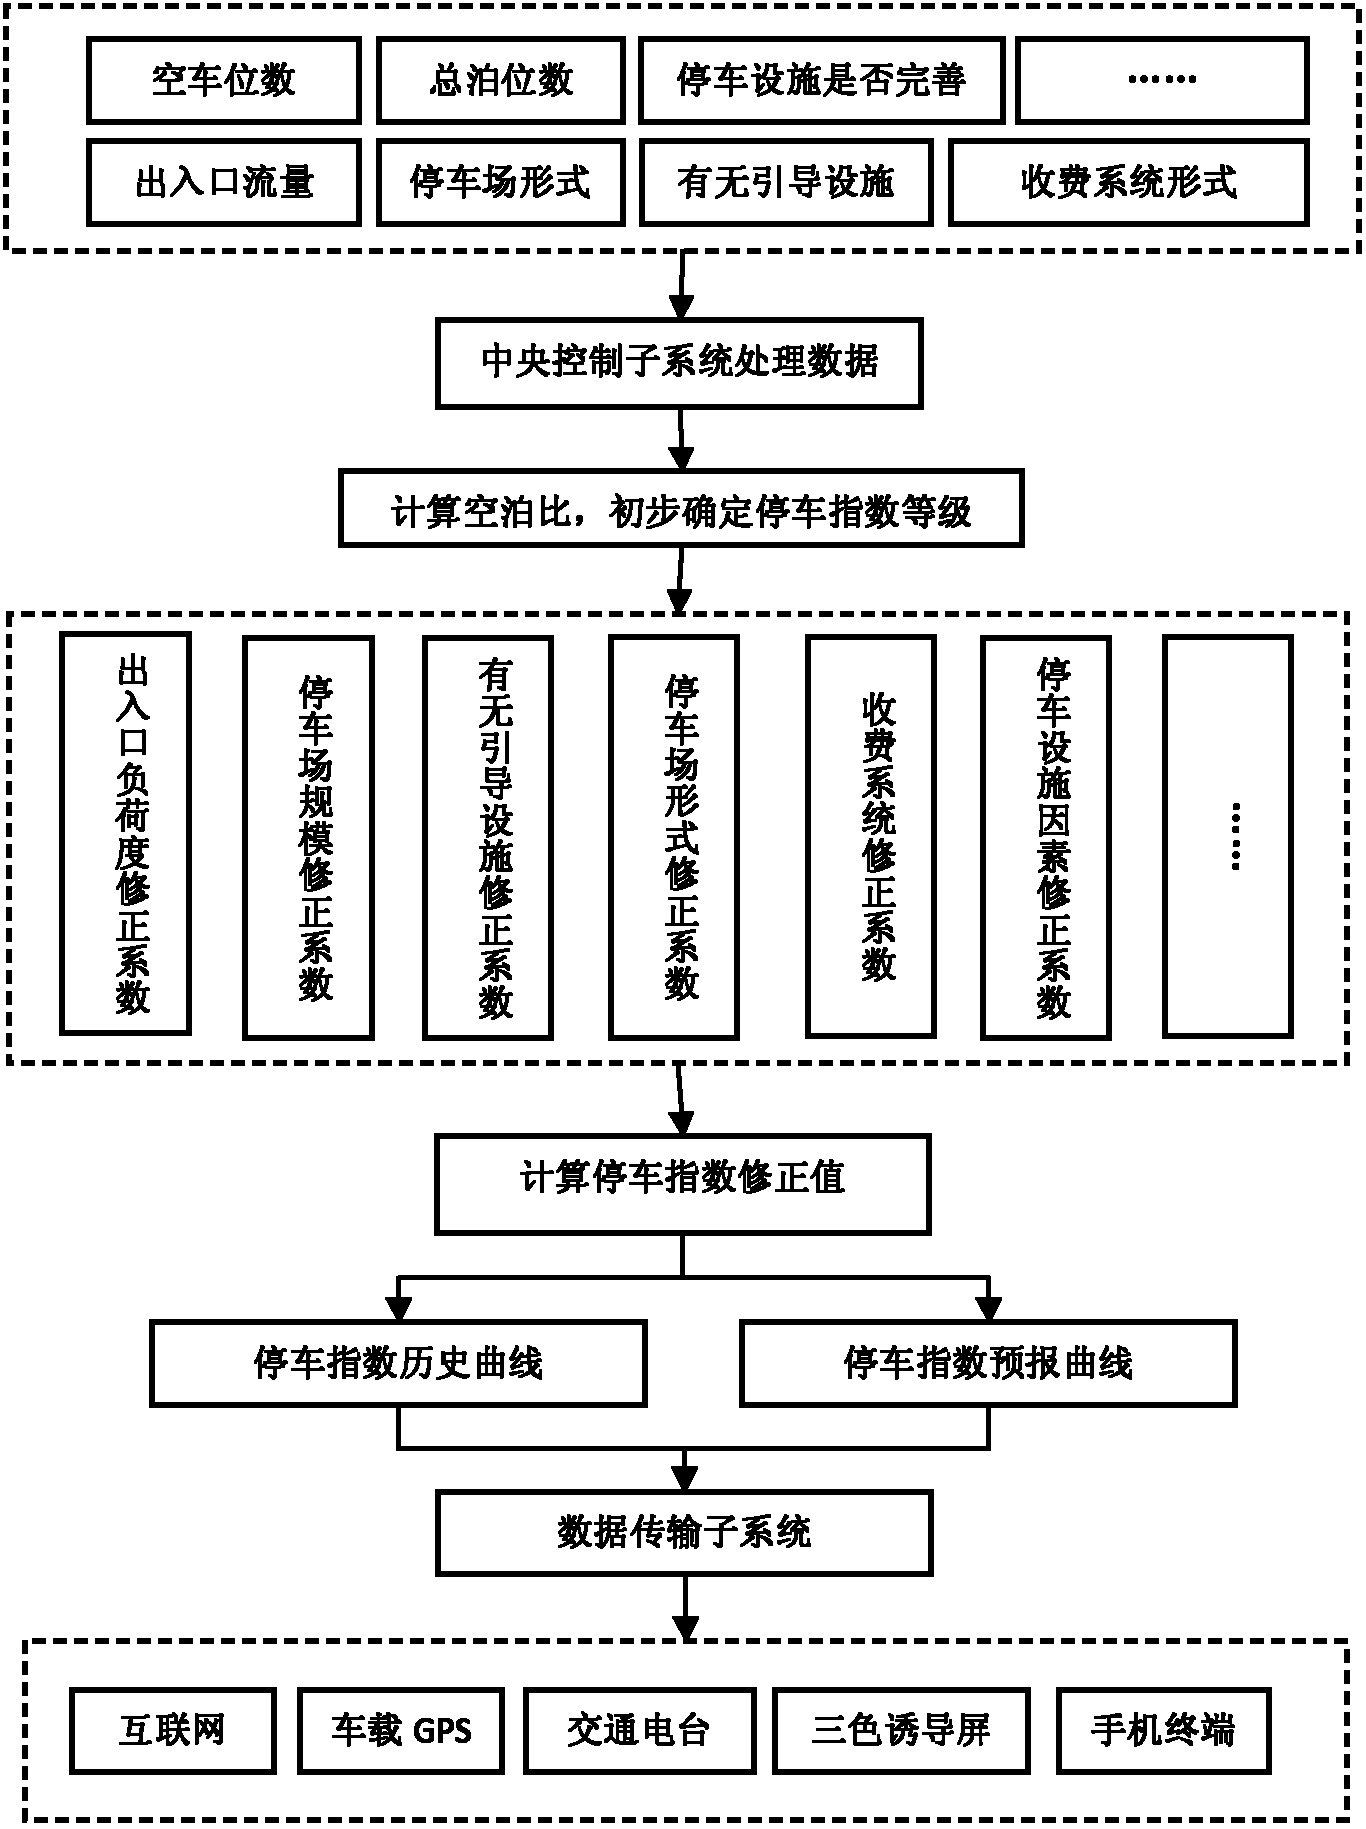 Parking index computing and issuing method